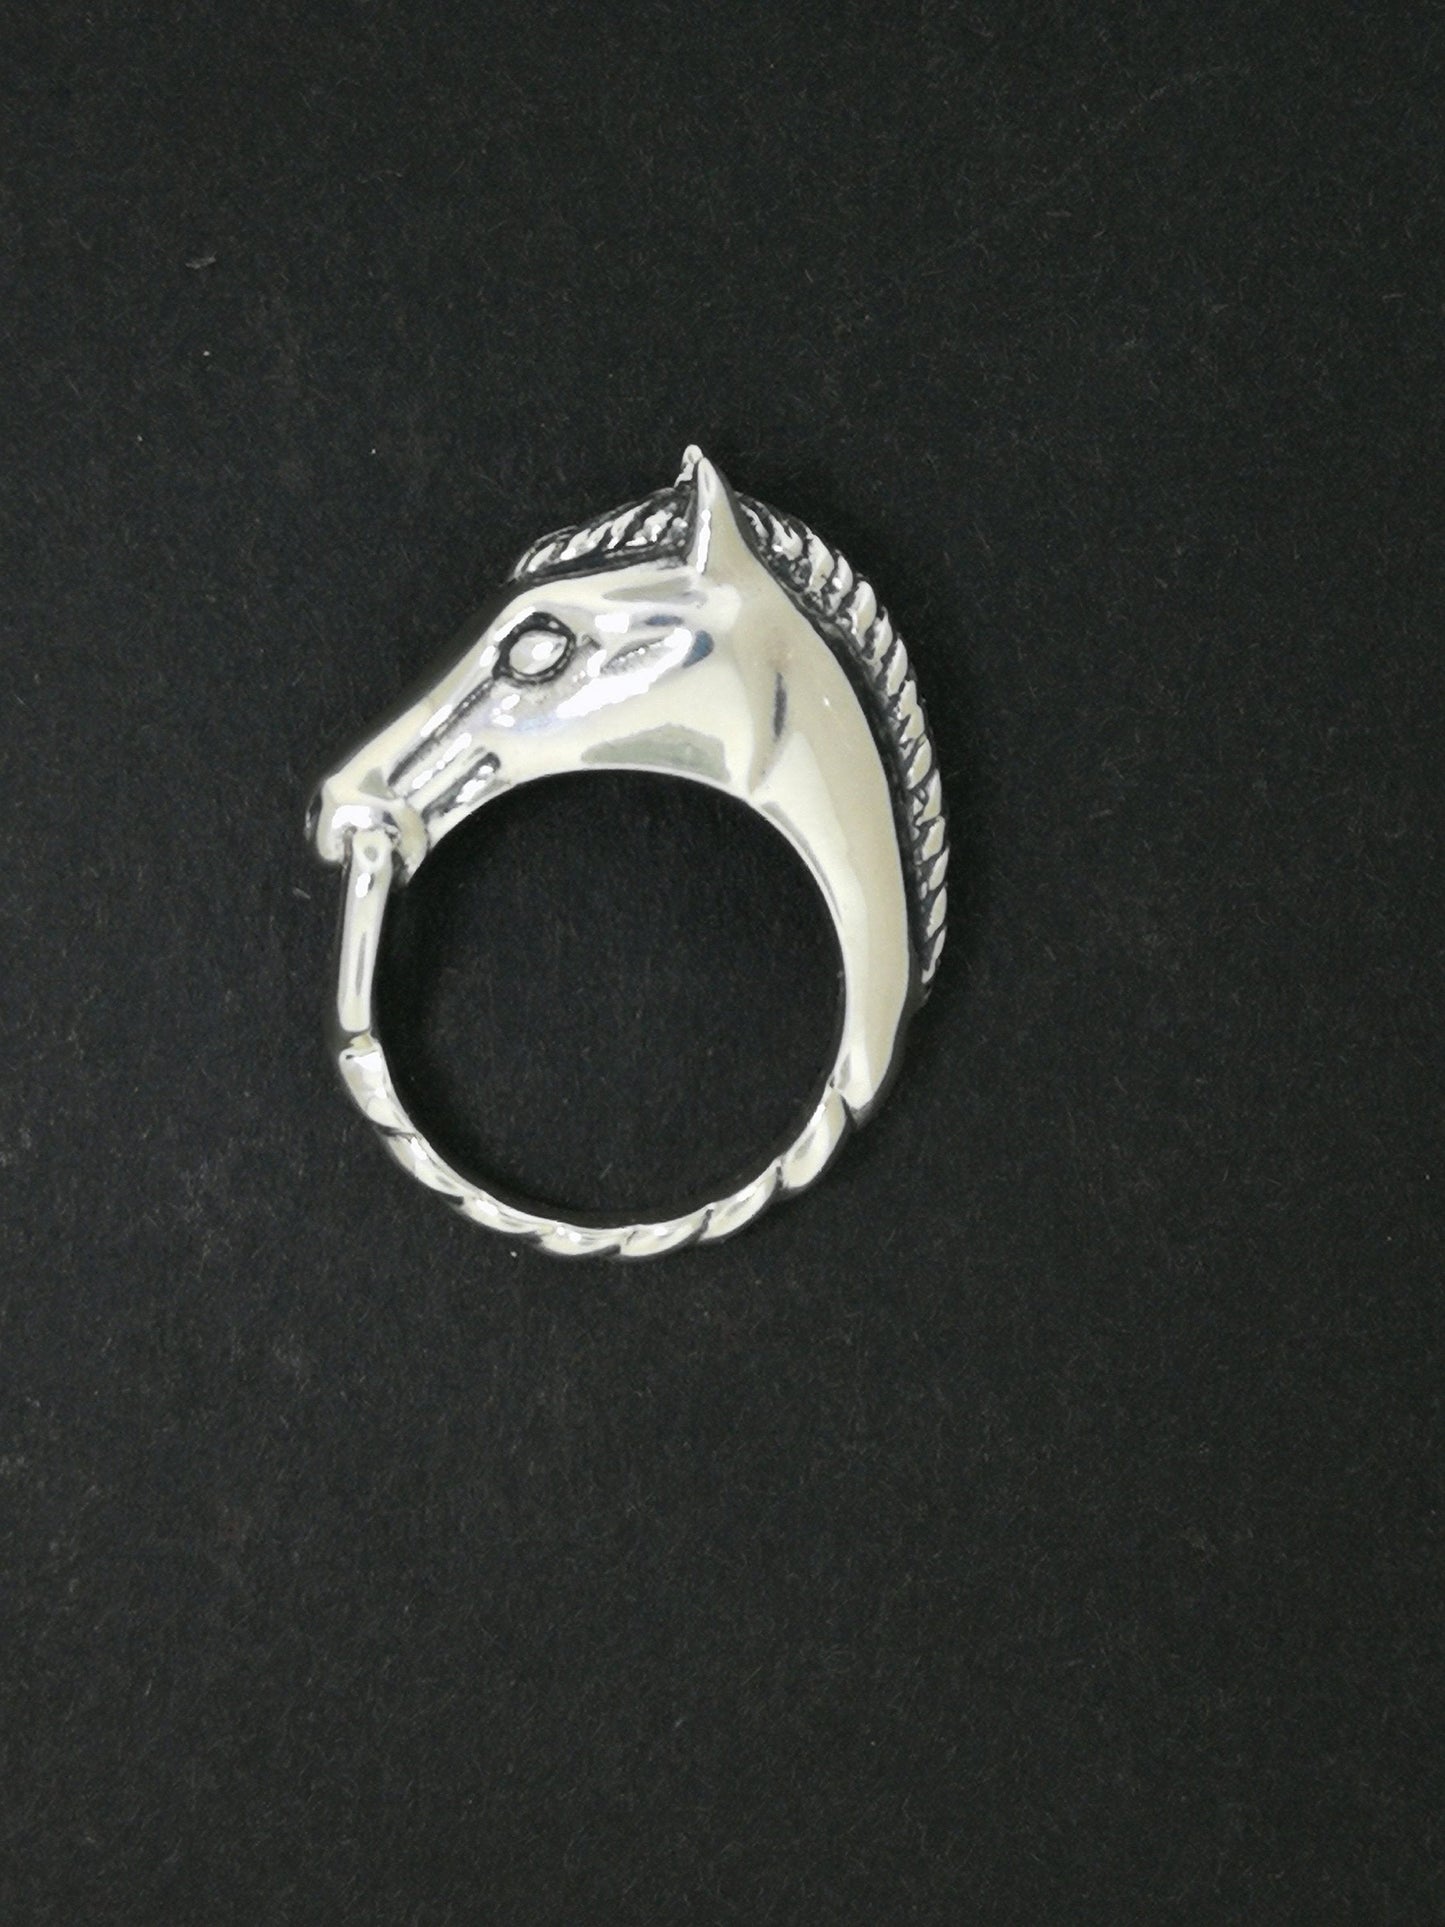 3D Horse Head Ring Sterling Silver, Silver Horse Ring, Sterling Silver Equine Ring, Silver Equestian Ring, Horse Ring In Silver, Silver Horse Jewelry, Silver Horse Jewellery, Silver Animal Jewelry, Horse Lover Jewellery, Unisex Silver Horse Ring